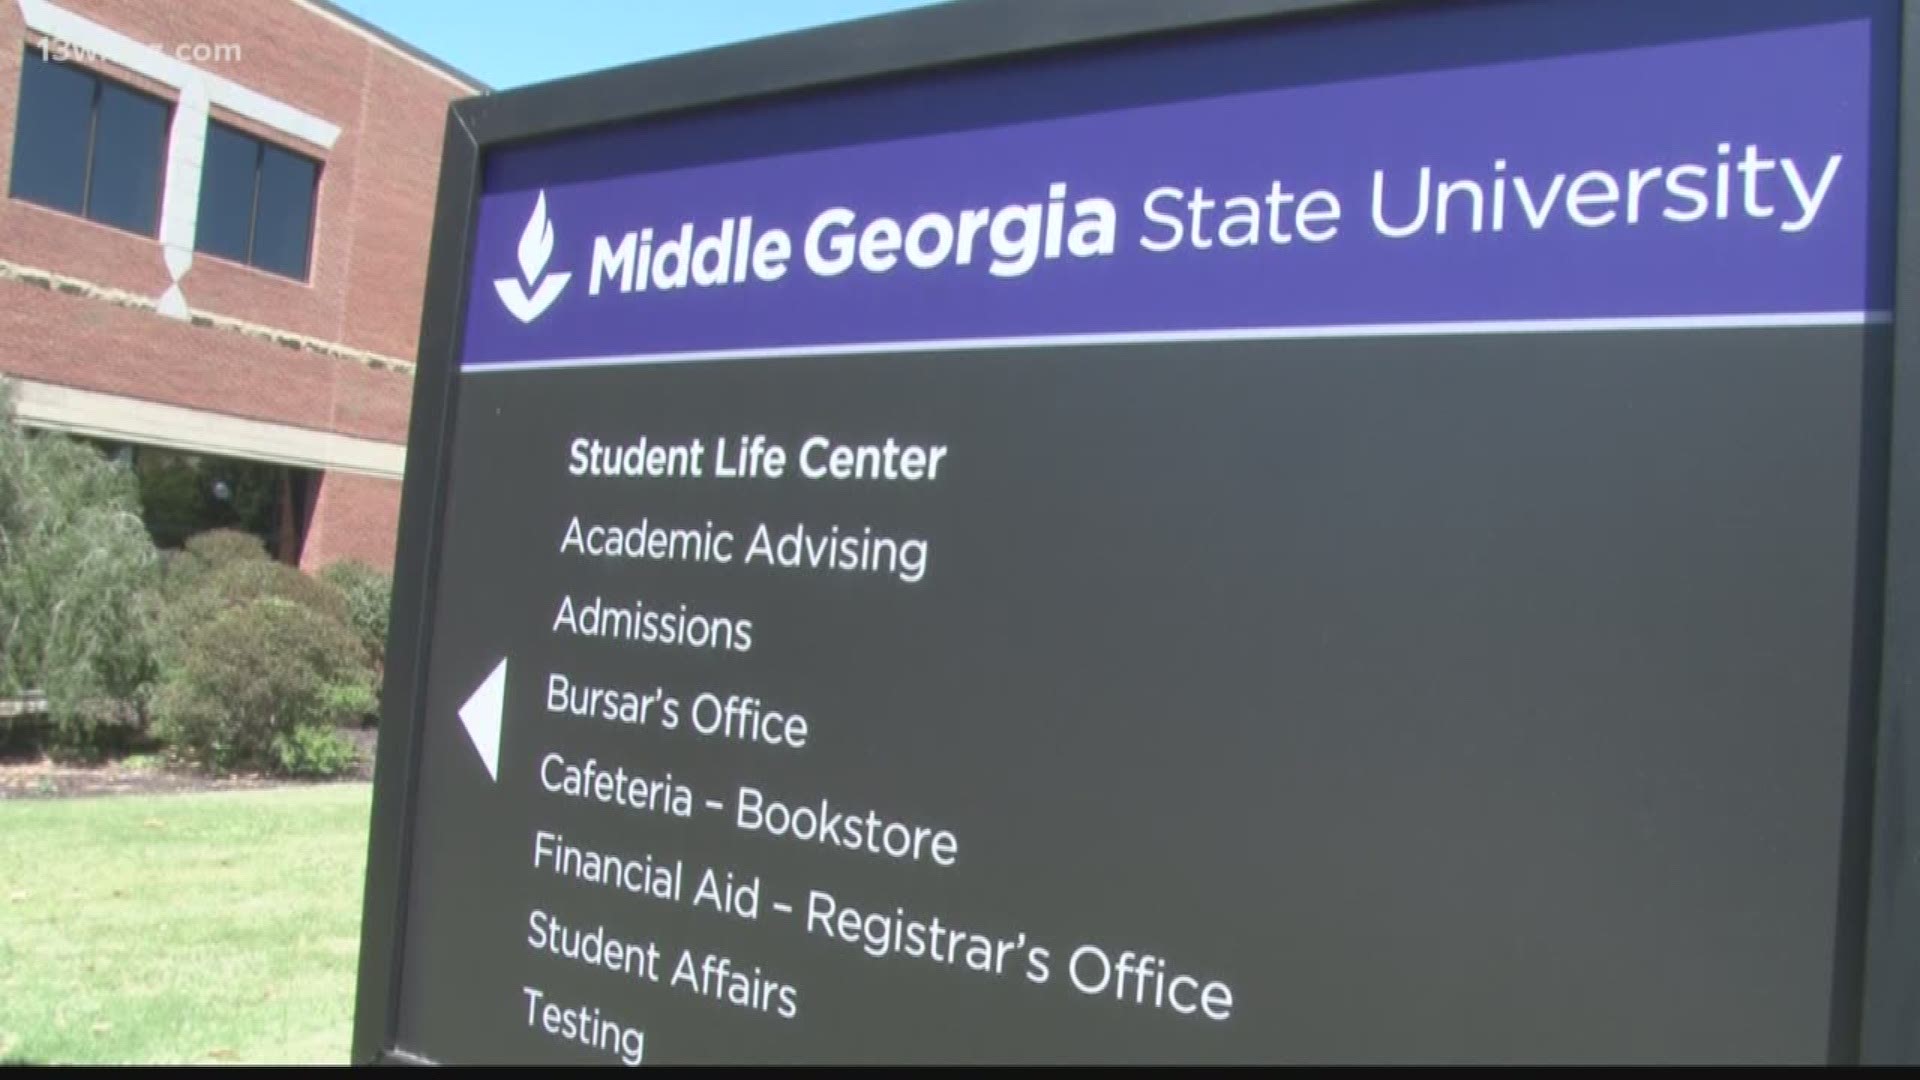 College tuition is going up for all 26 of the University System of Georgia schools. Students can expect to see a 2.5 percent tuition increase and an extra $25 added to their fees this fall.